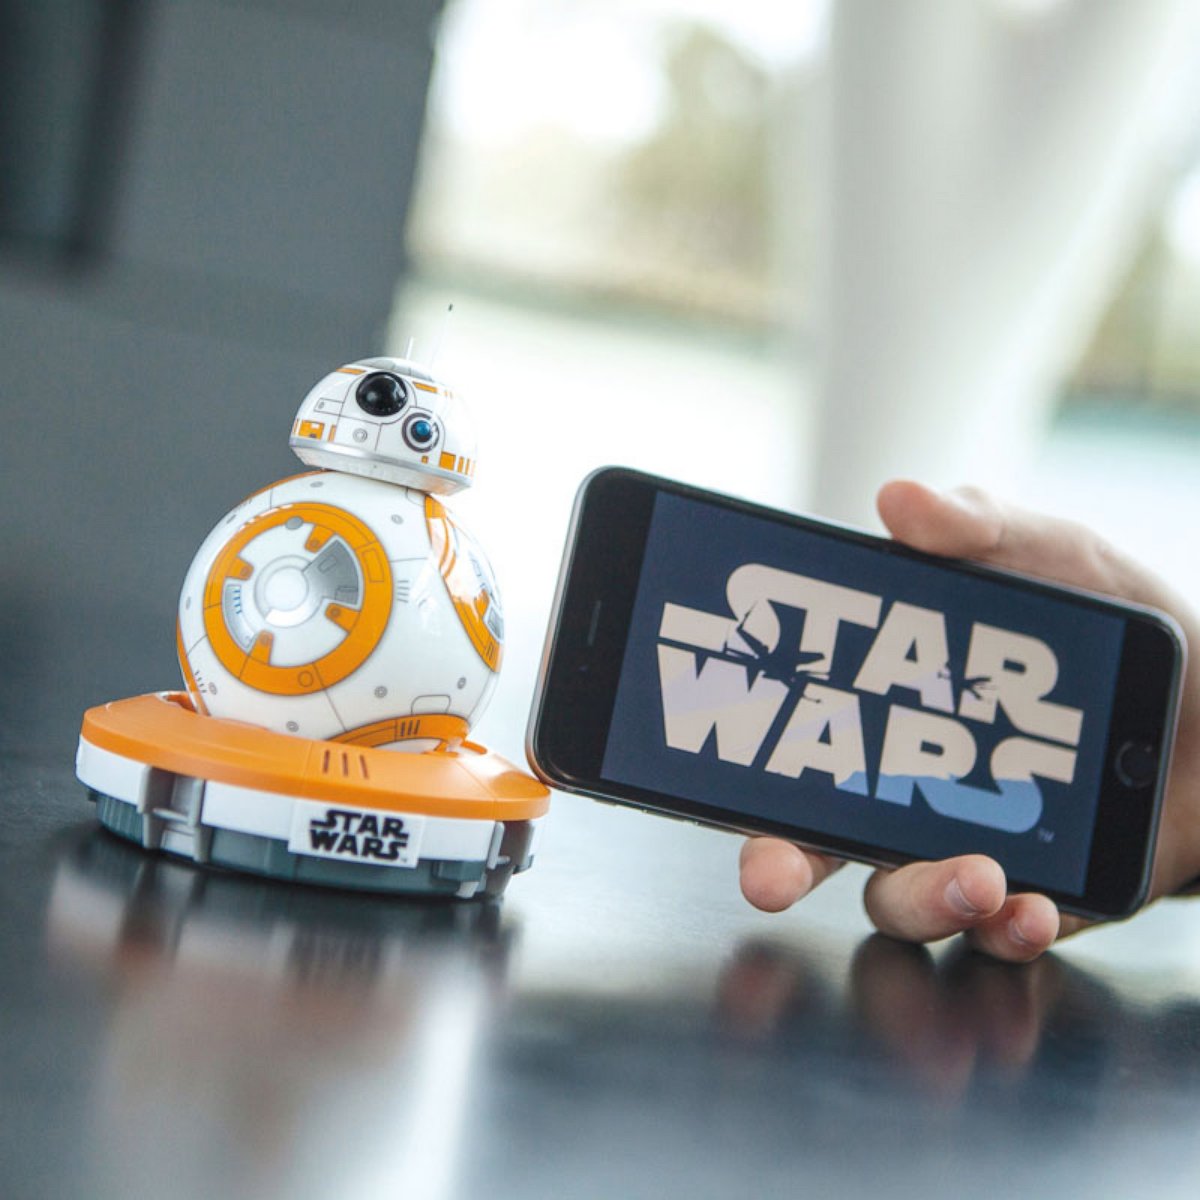 PHOTO: Sphero has created an app-enabled BB-8. http://store.sphero.com/collections/bb-8-by-